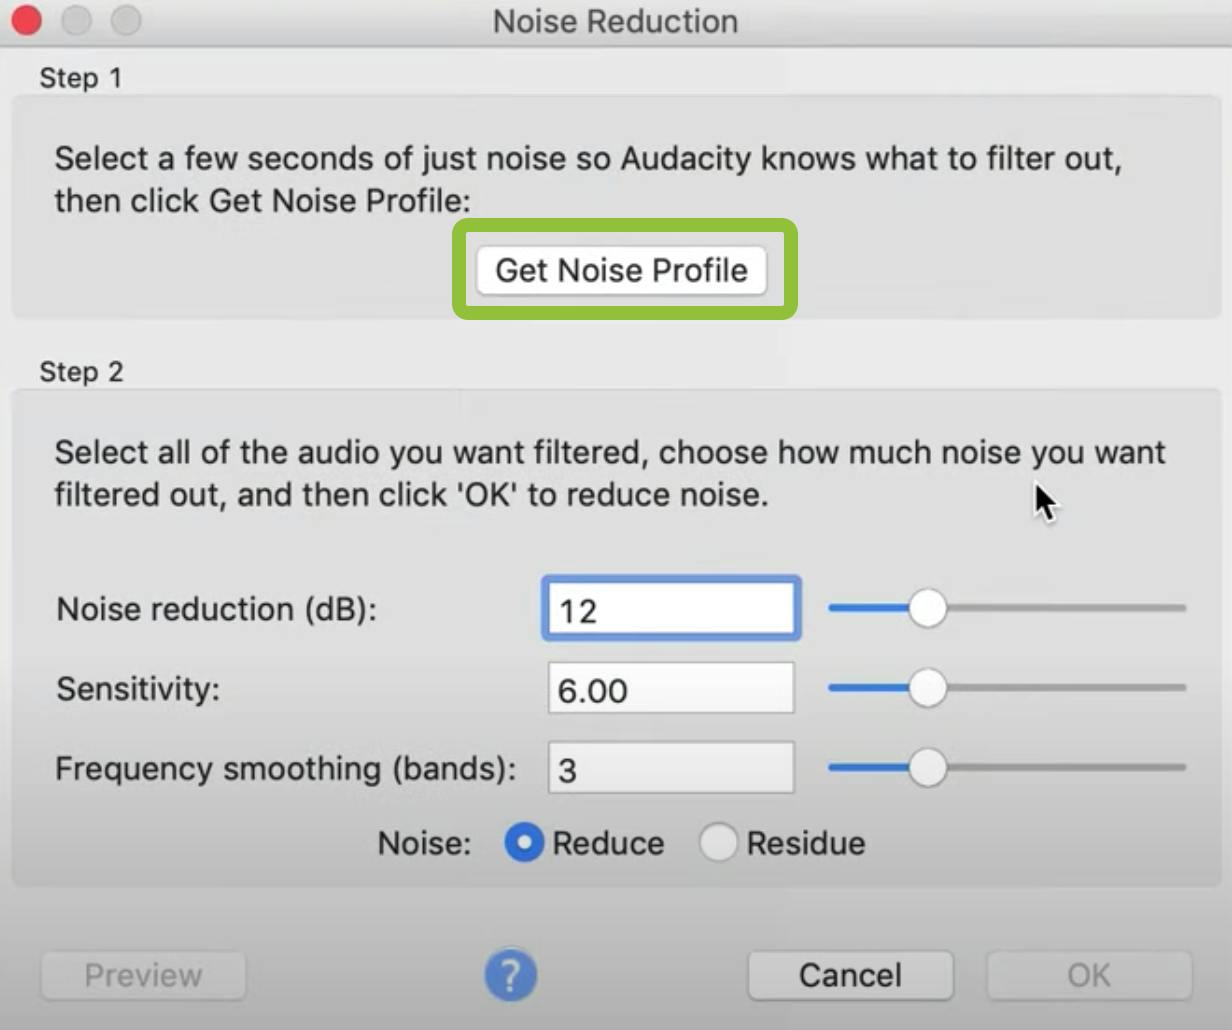 Noise Reduction window with green box around Get Noise Profile